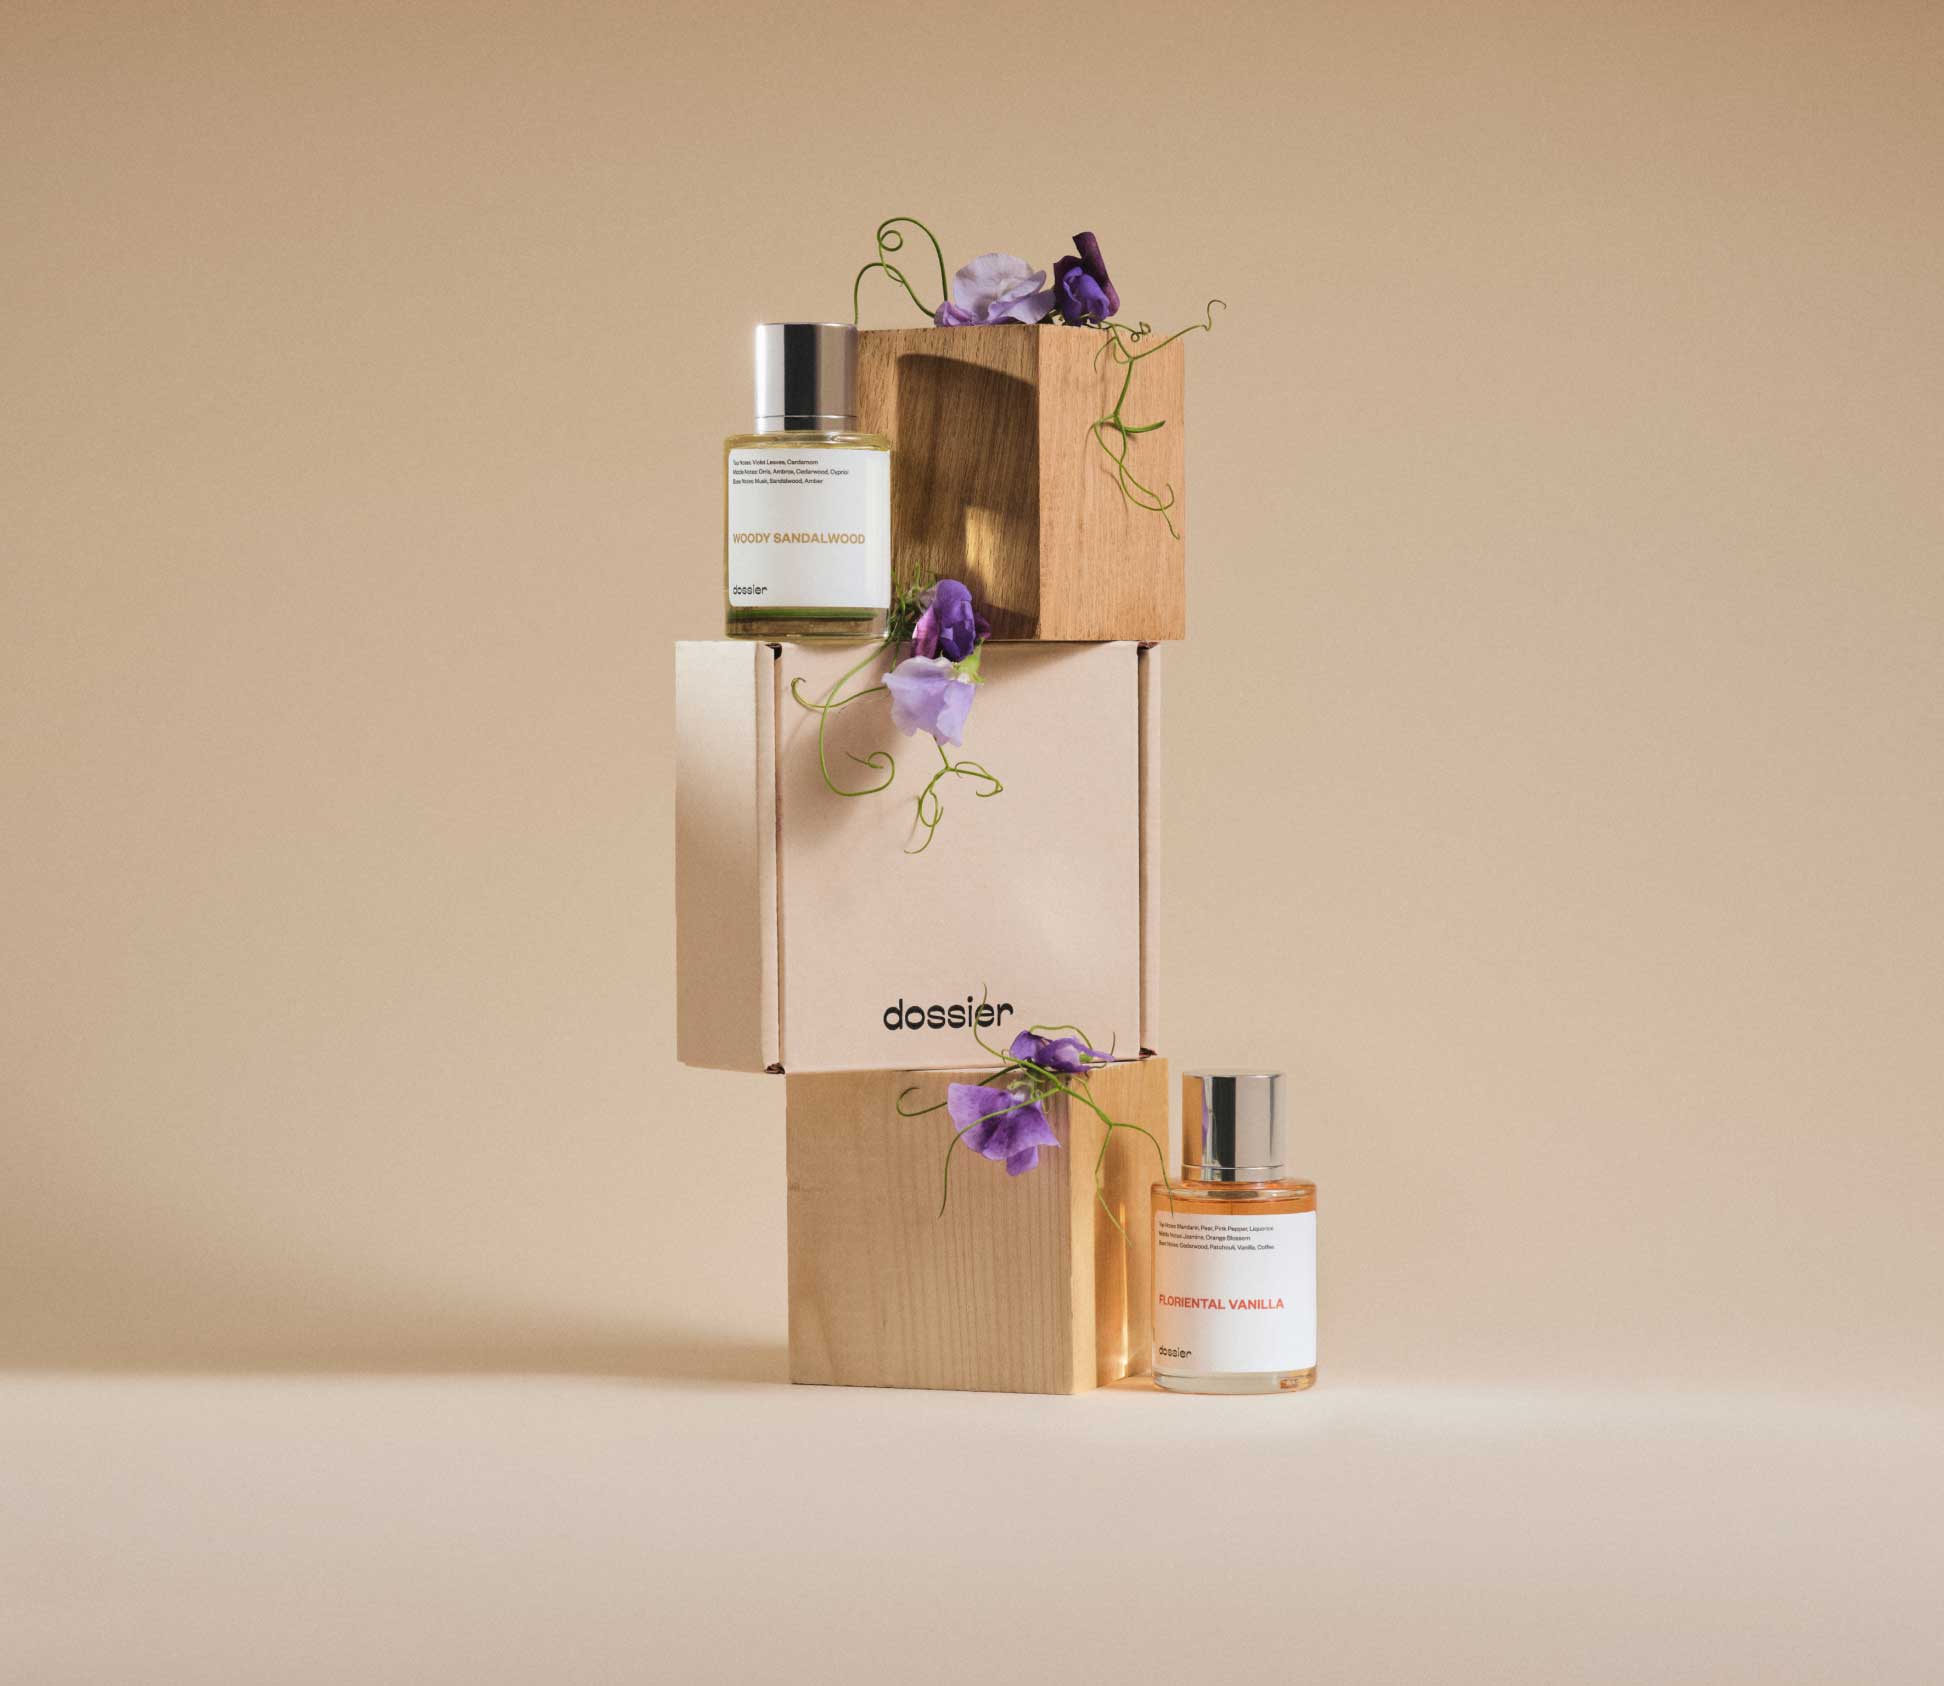 Sustainability - Dossier Perfumes